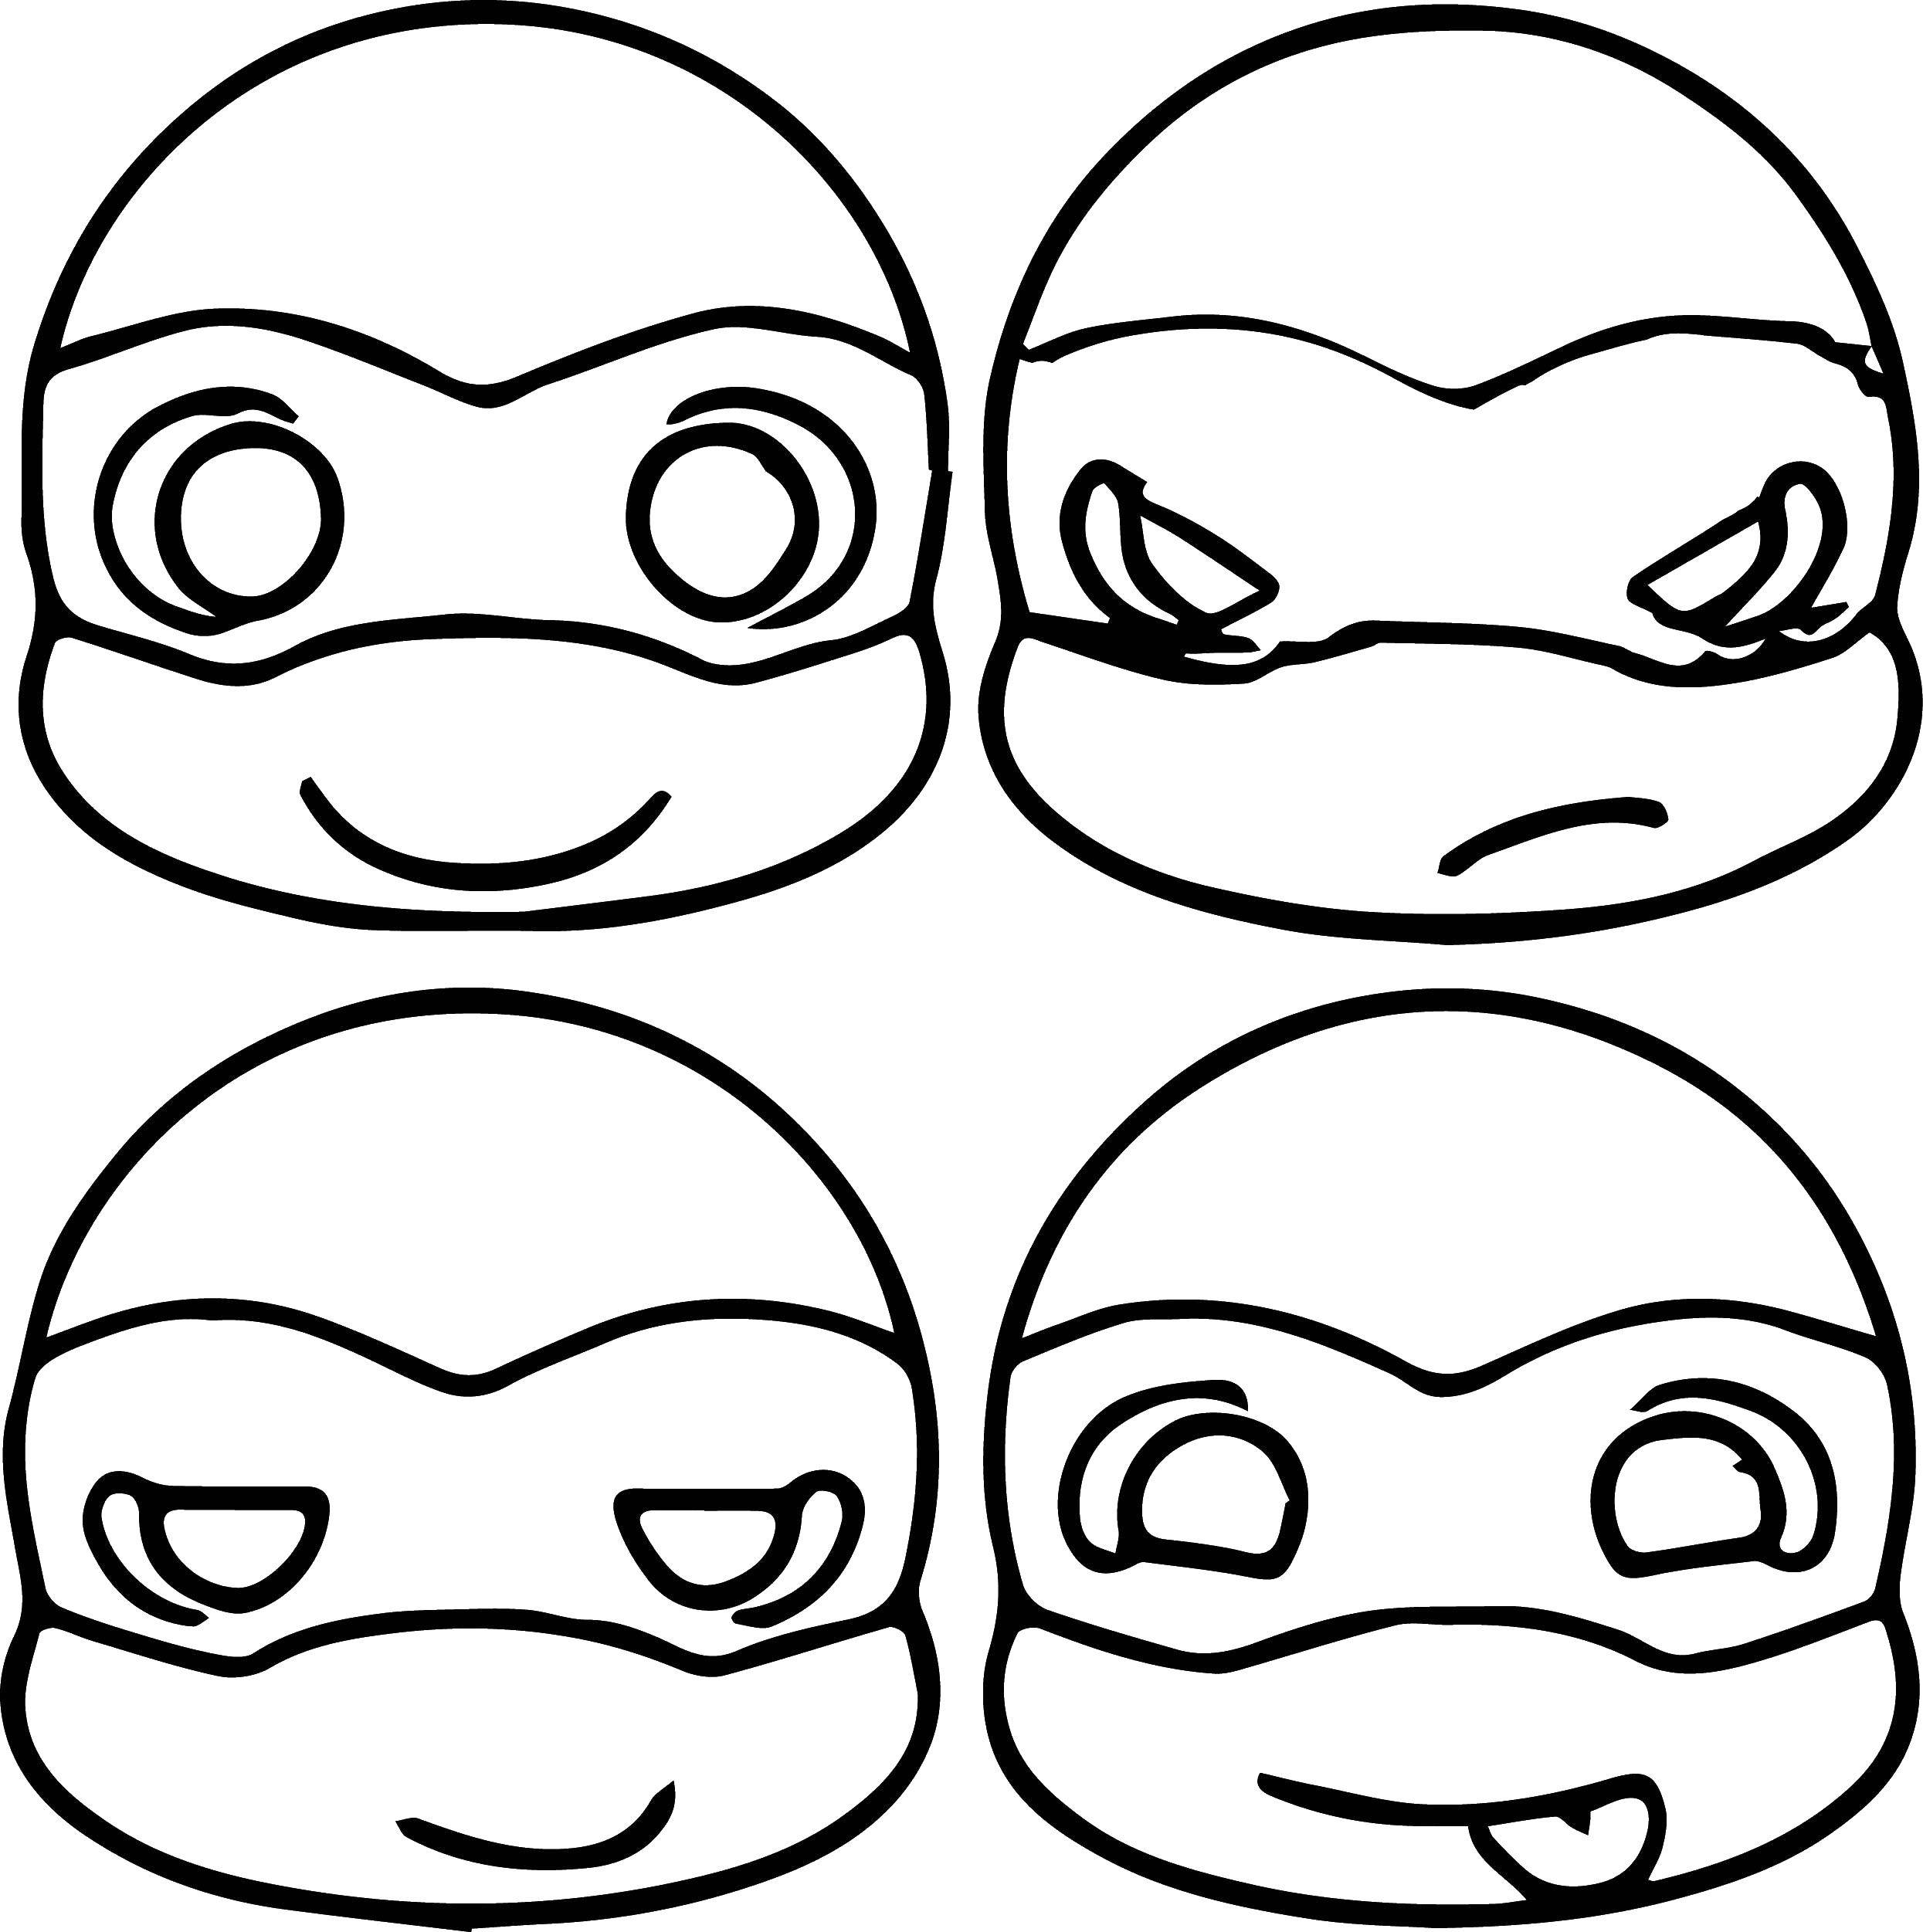 Coloring Paint a team. Category teenage mutant ninja turtles. Tags:  Comics, Teenage Mutant Ninja Turtles.